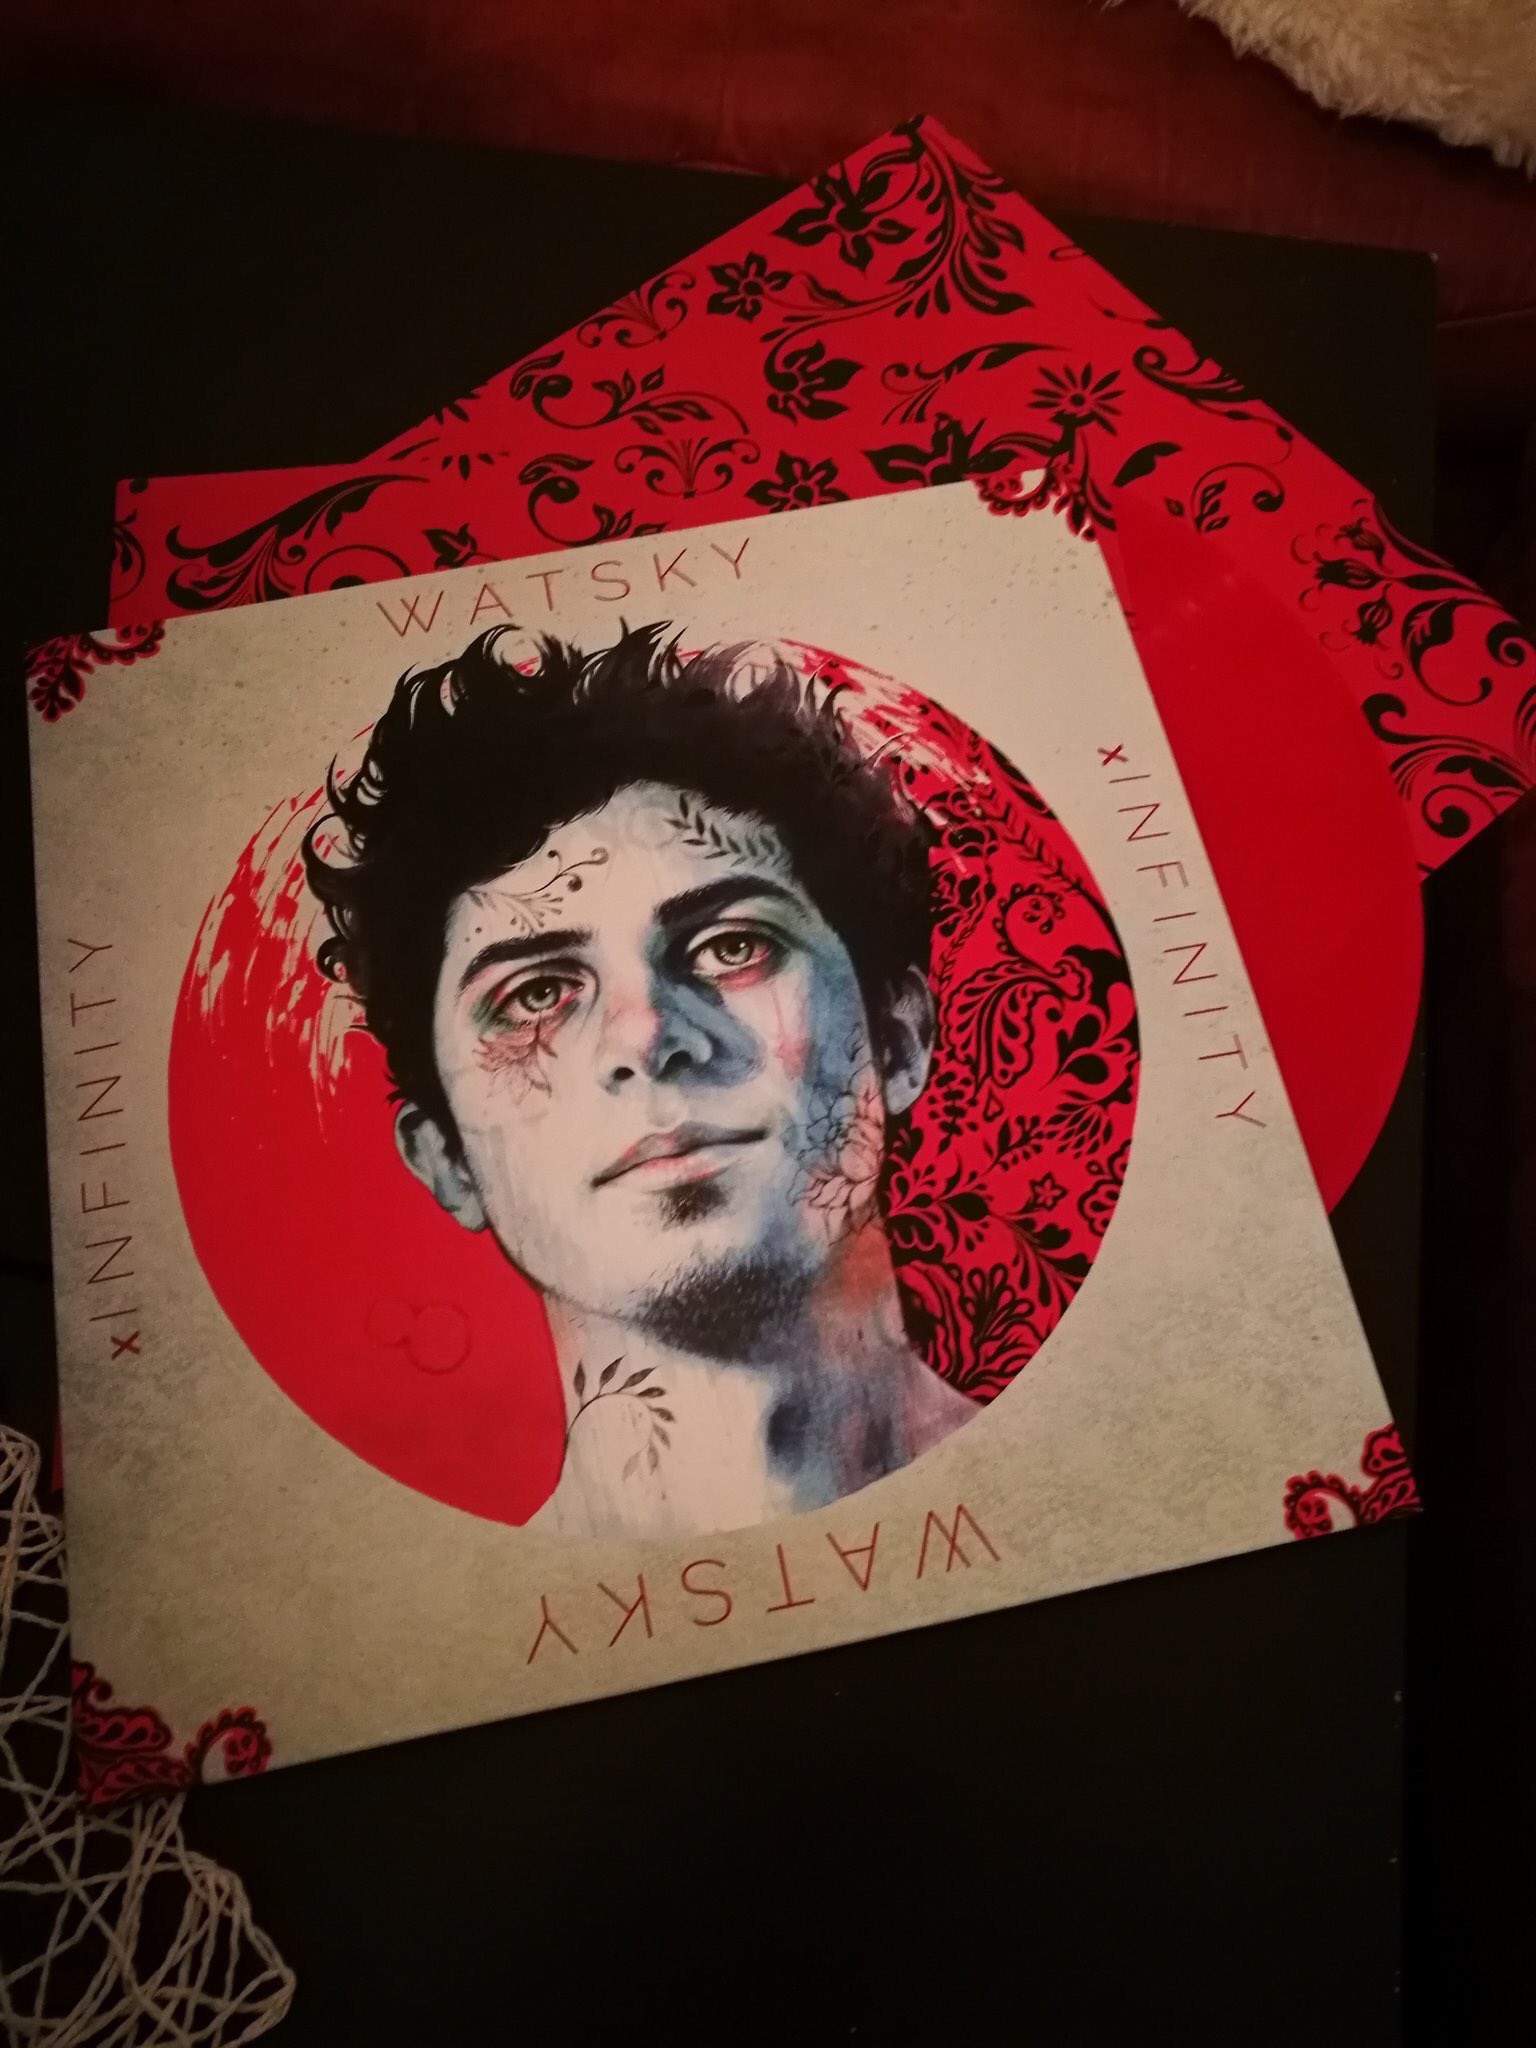 watsky on Twitter: "SO sorry it took so long; Infinity Vinyls've finally shipped to those who got the package. I added free signed AYCD CDs as apology https://t.co/Xk56PBV4iJ" / Twitter